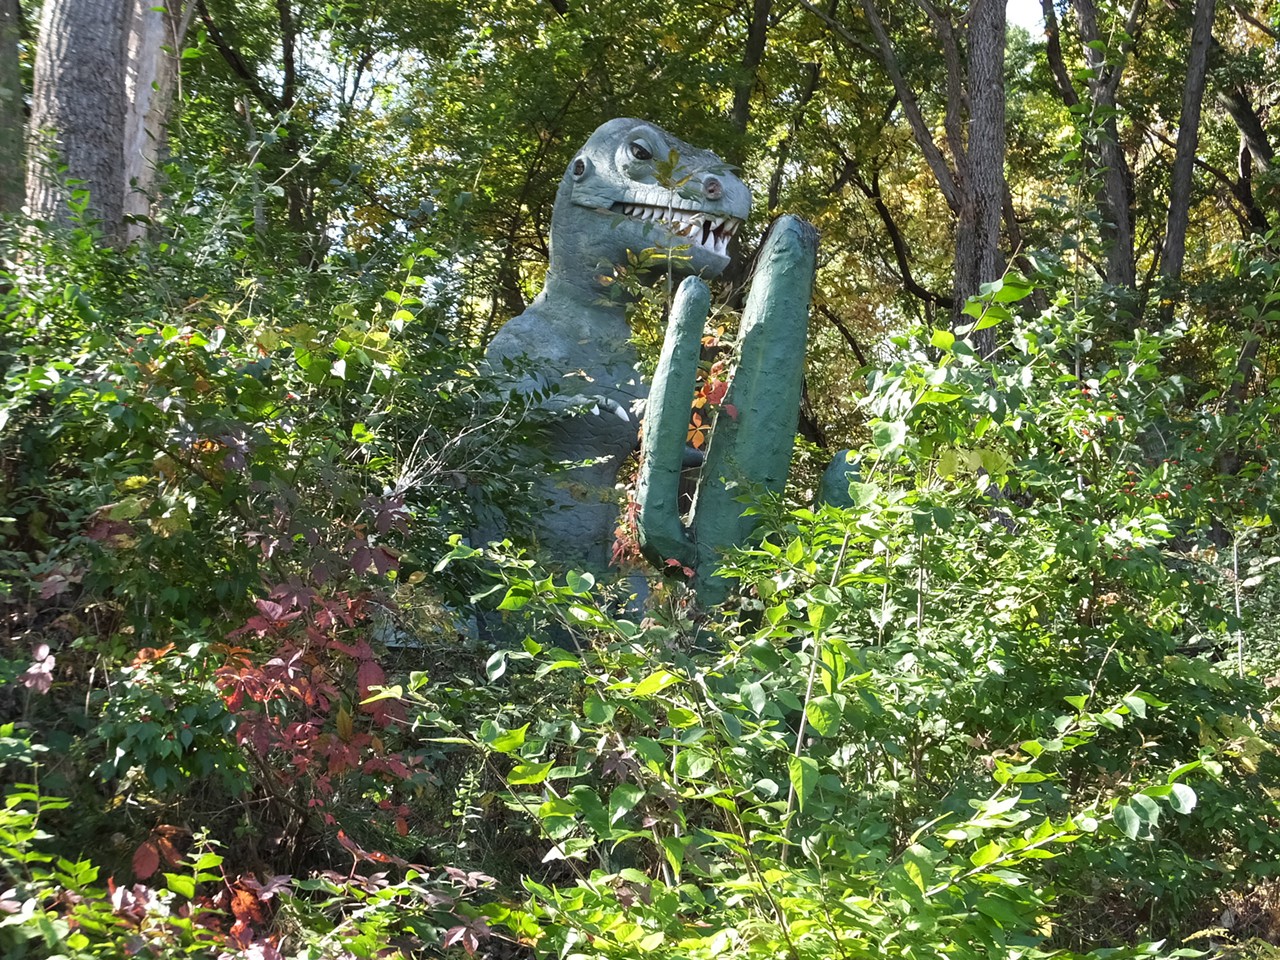 Prehistoric Forest Amusement Park, Onsted (1963-2002) 
Fiberglass dinosaurs were once king of this now-extinct Irish Hills tourist trap located along U.S. Route 12, which even featured a smoking volcano. It has since fallen into disrepair, with the dinos prey to vandalism.